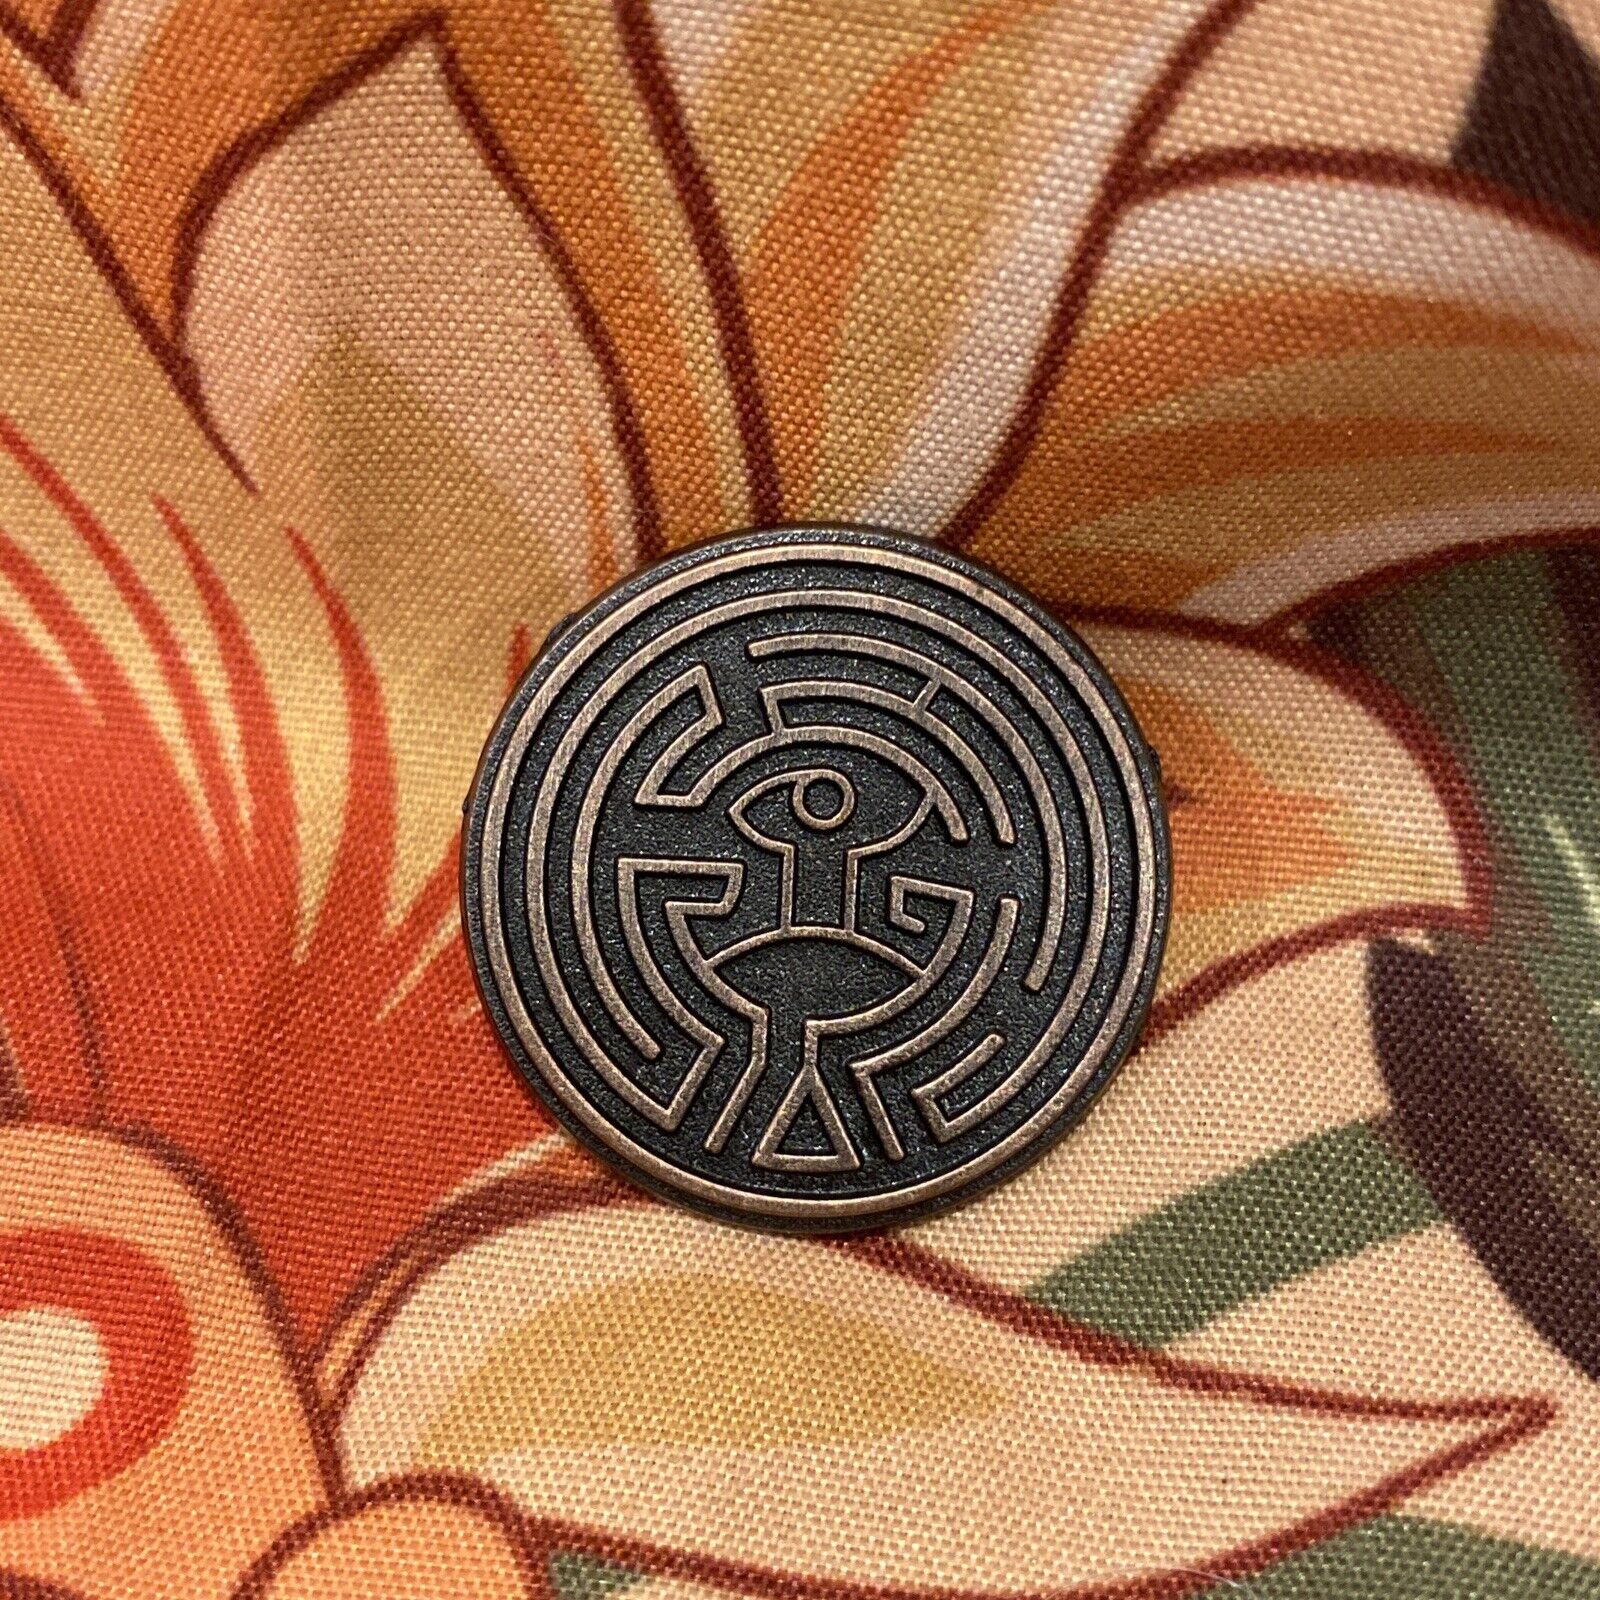 Westworld Maze Pin Loot Crate Exclusive January 2018 Discover Theme #LOOTPINS